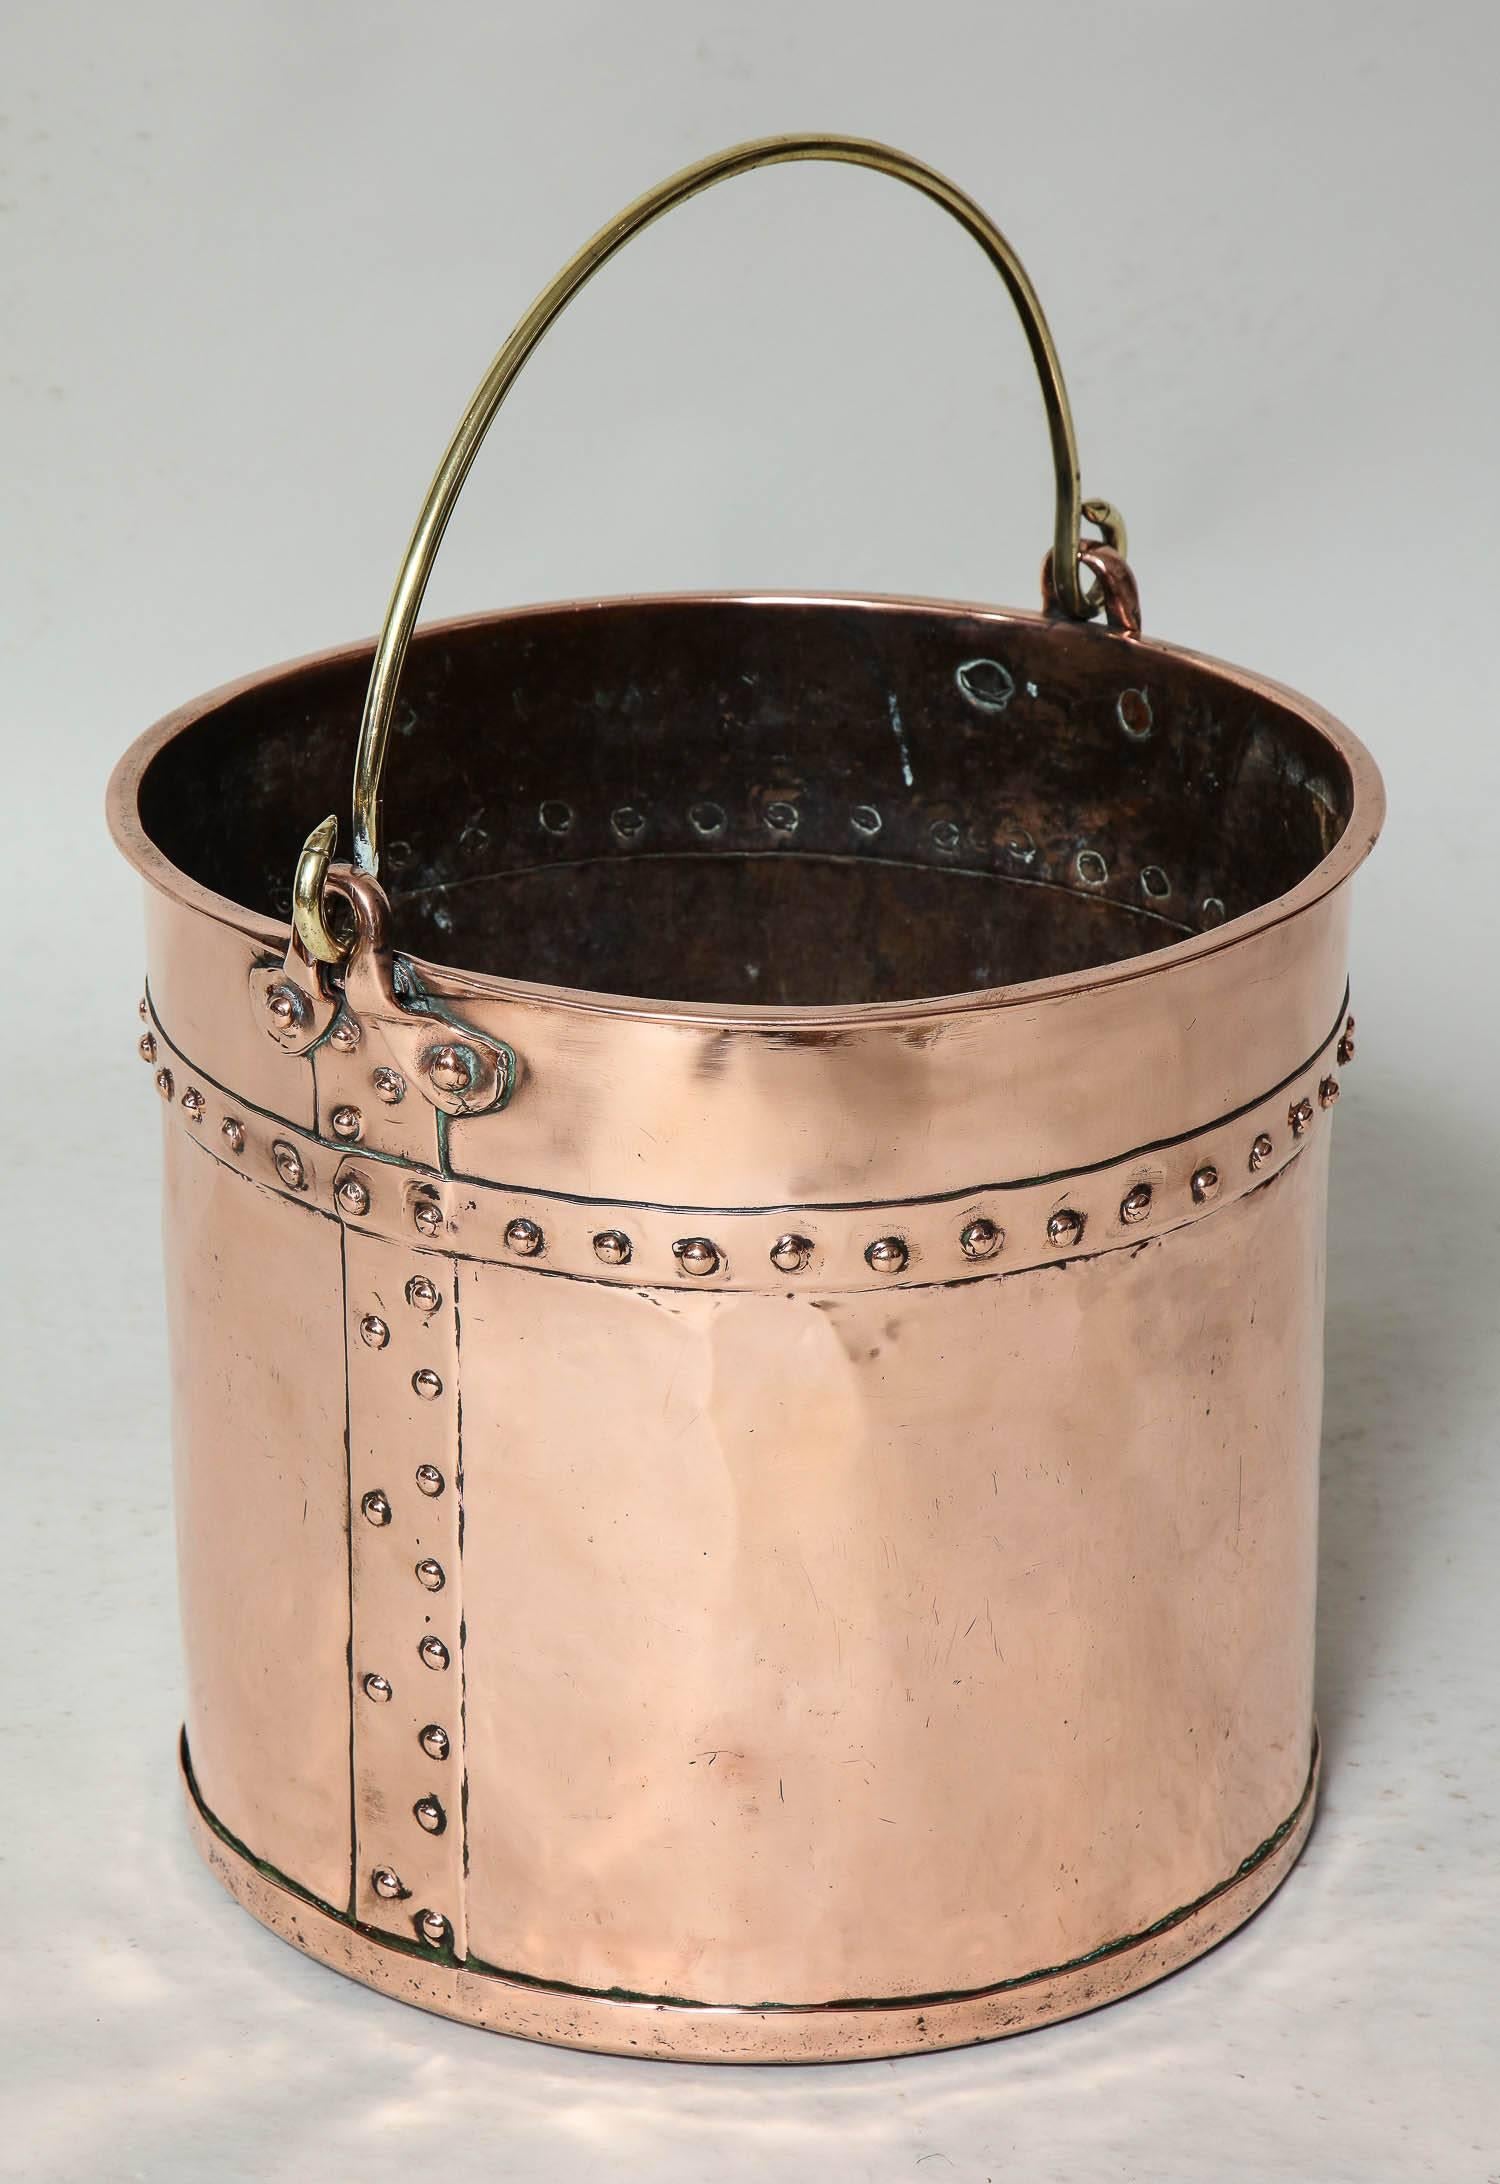 Good English 19th century copper bucket with brass bail handle, rolled edge and hand-hammered riveted construction. Excellent for kindling or waste paper basket.